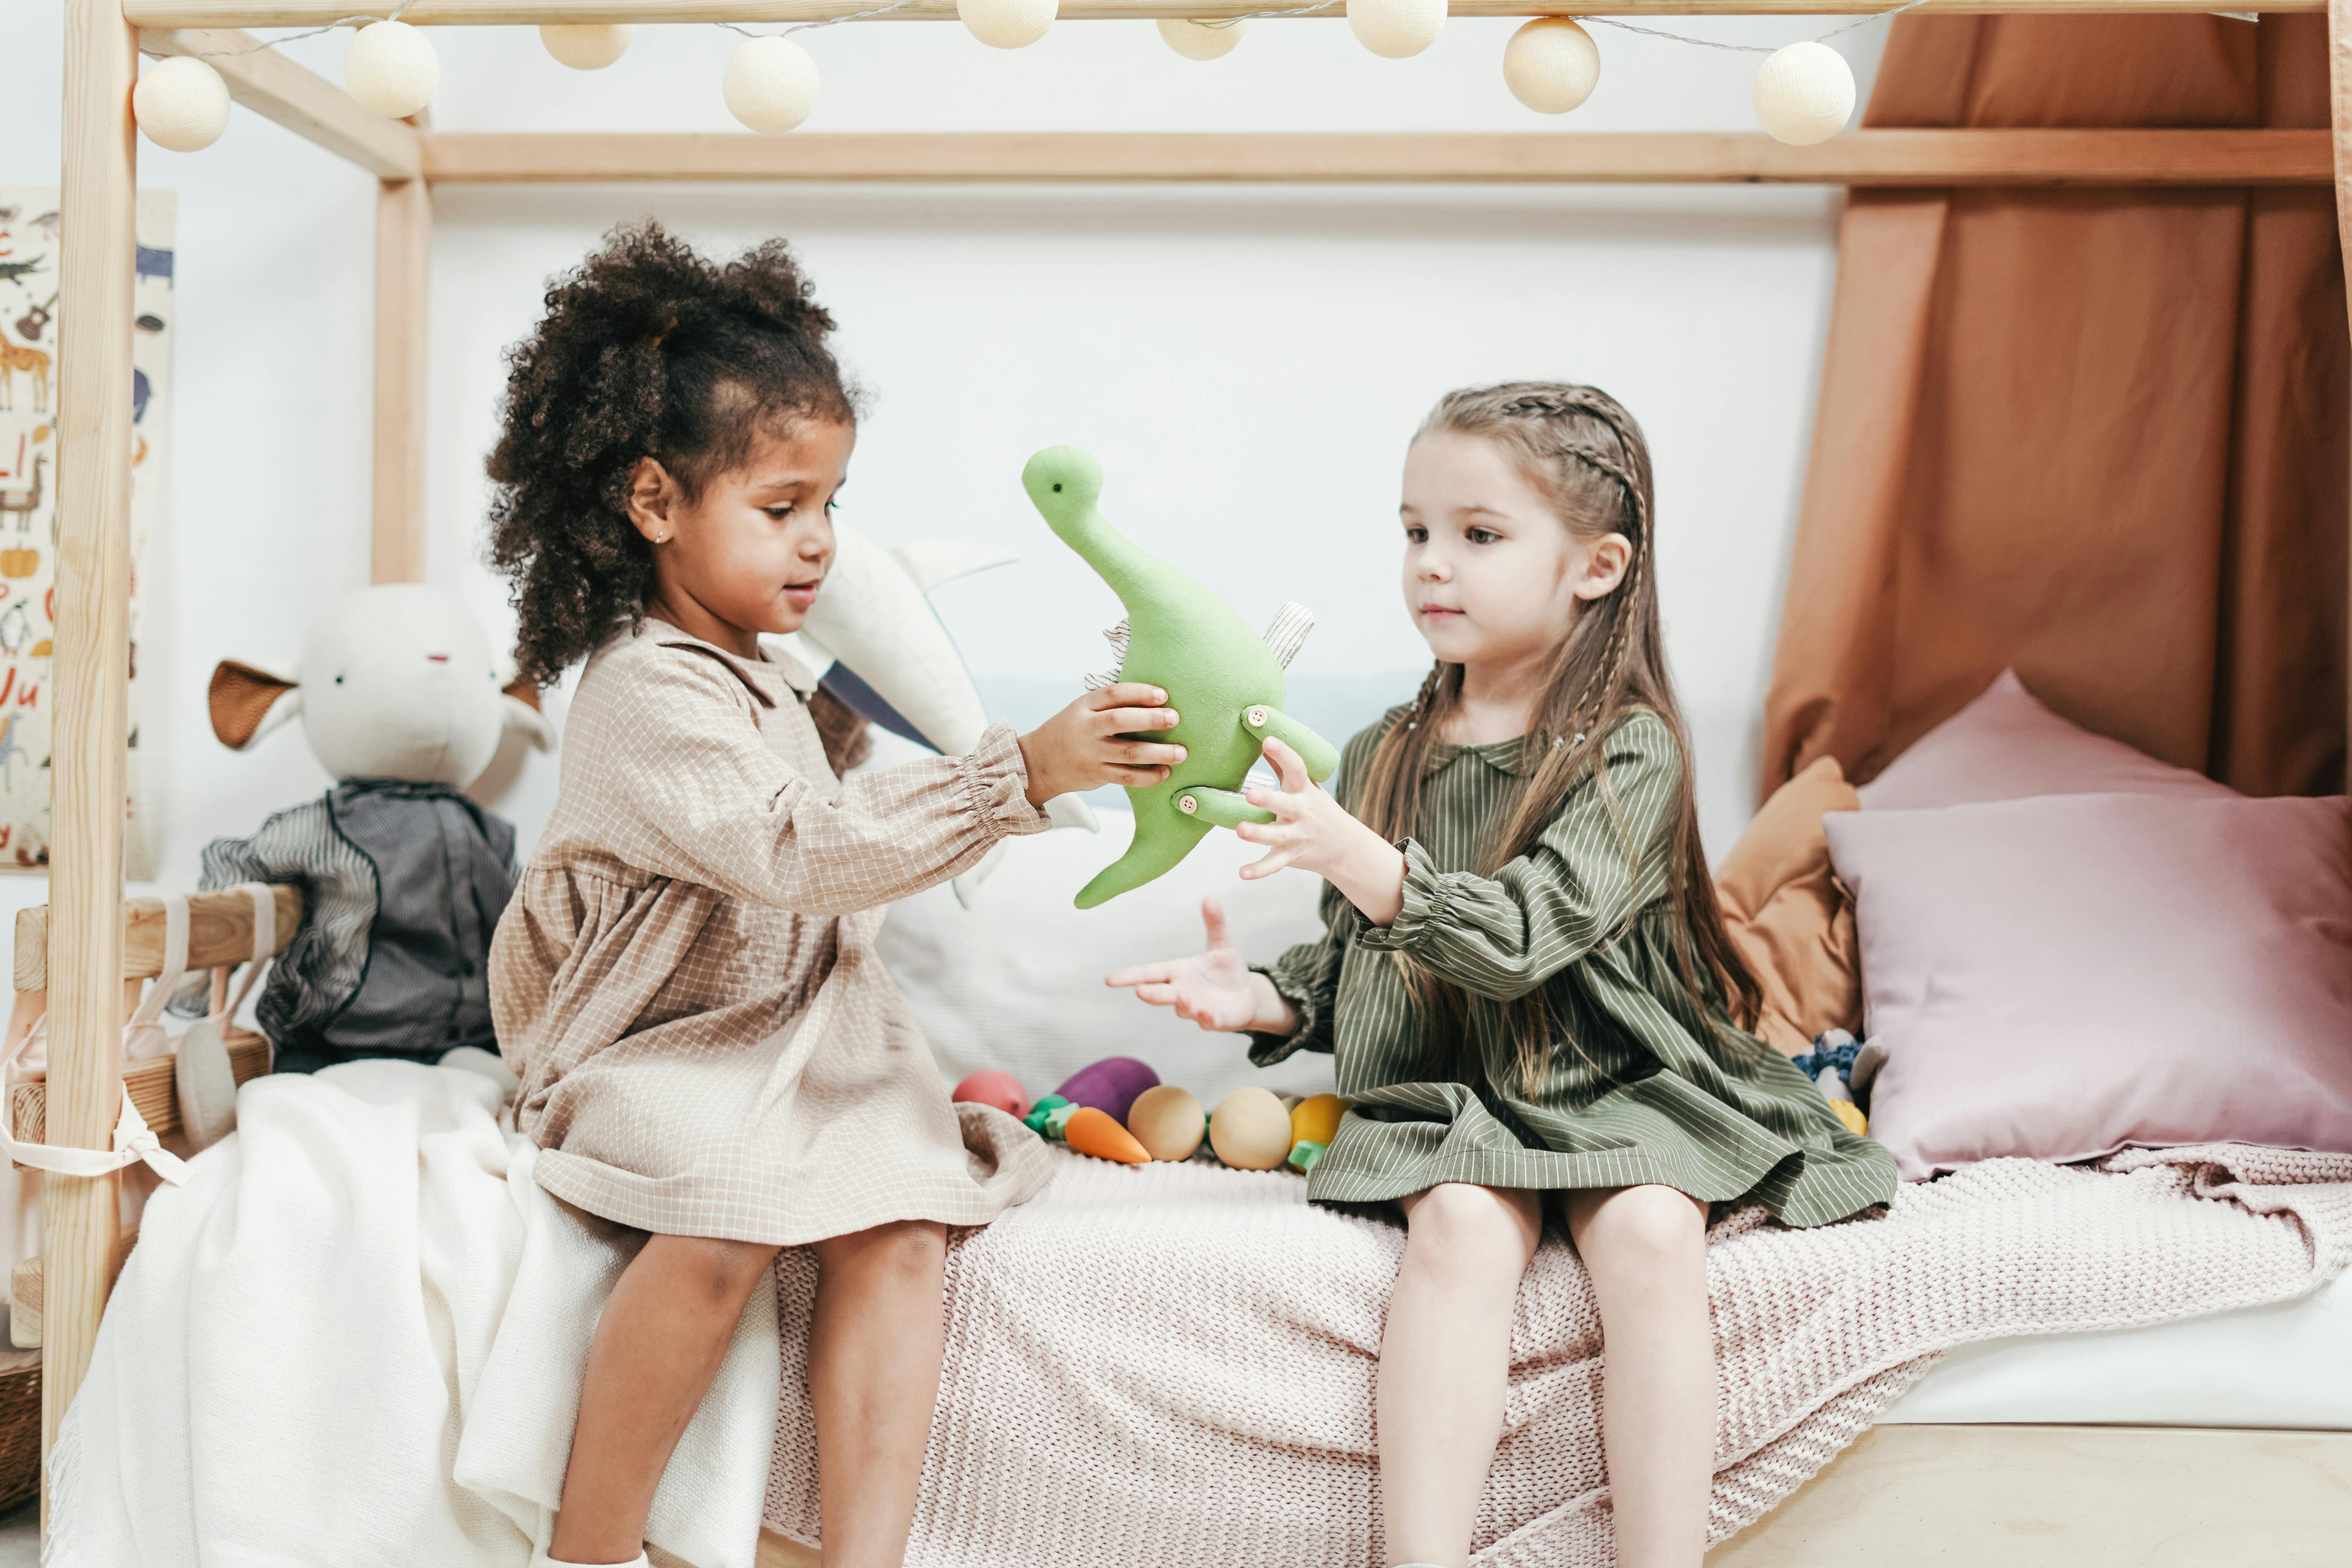 Little girls playing with toys | Source: Pexels